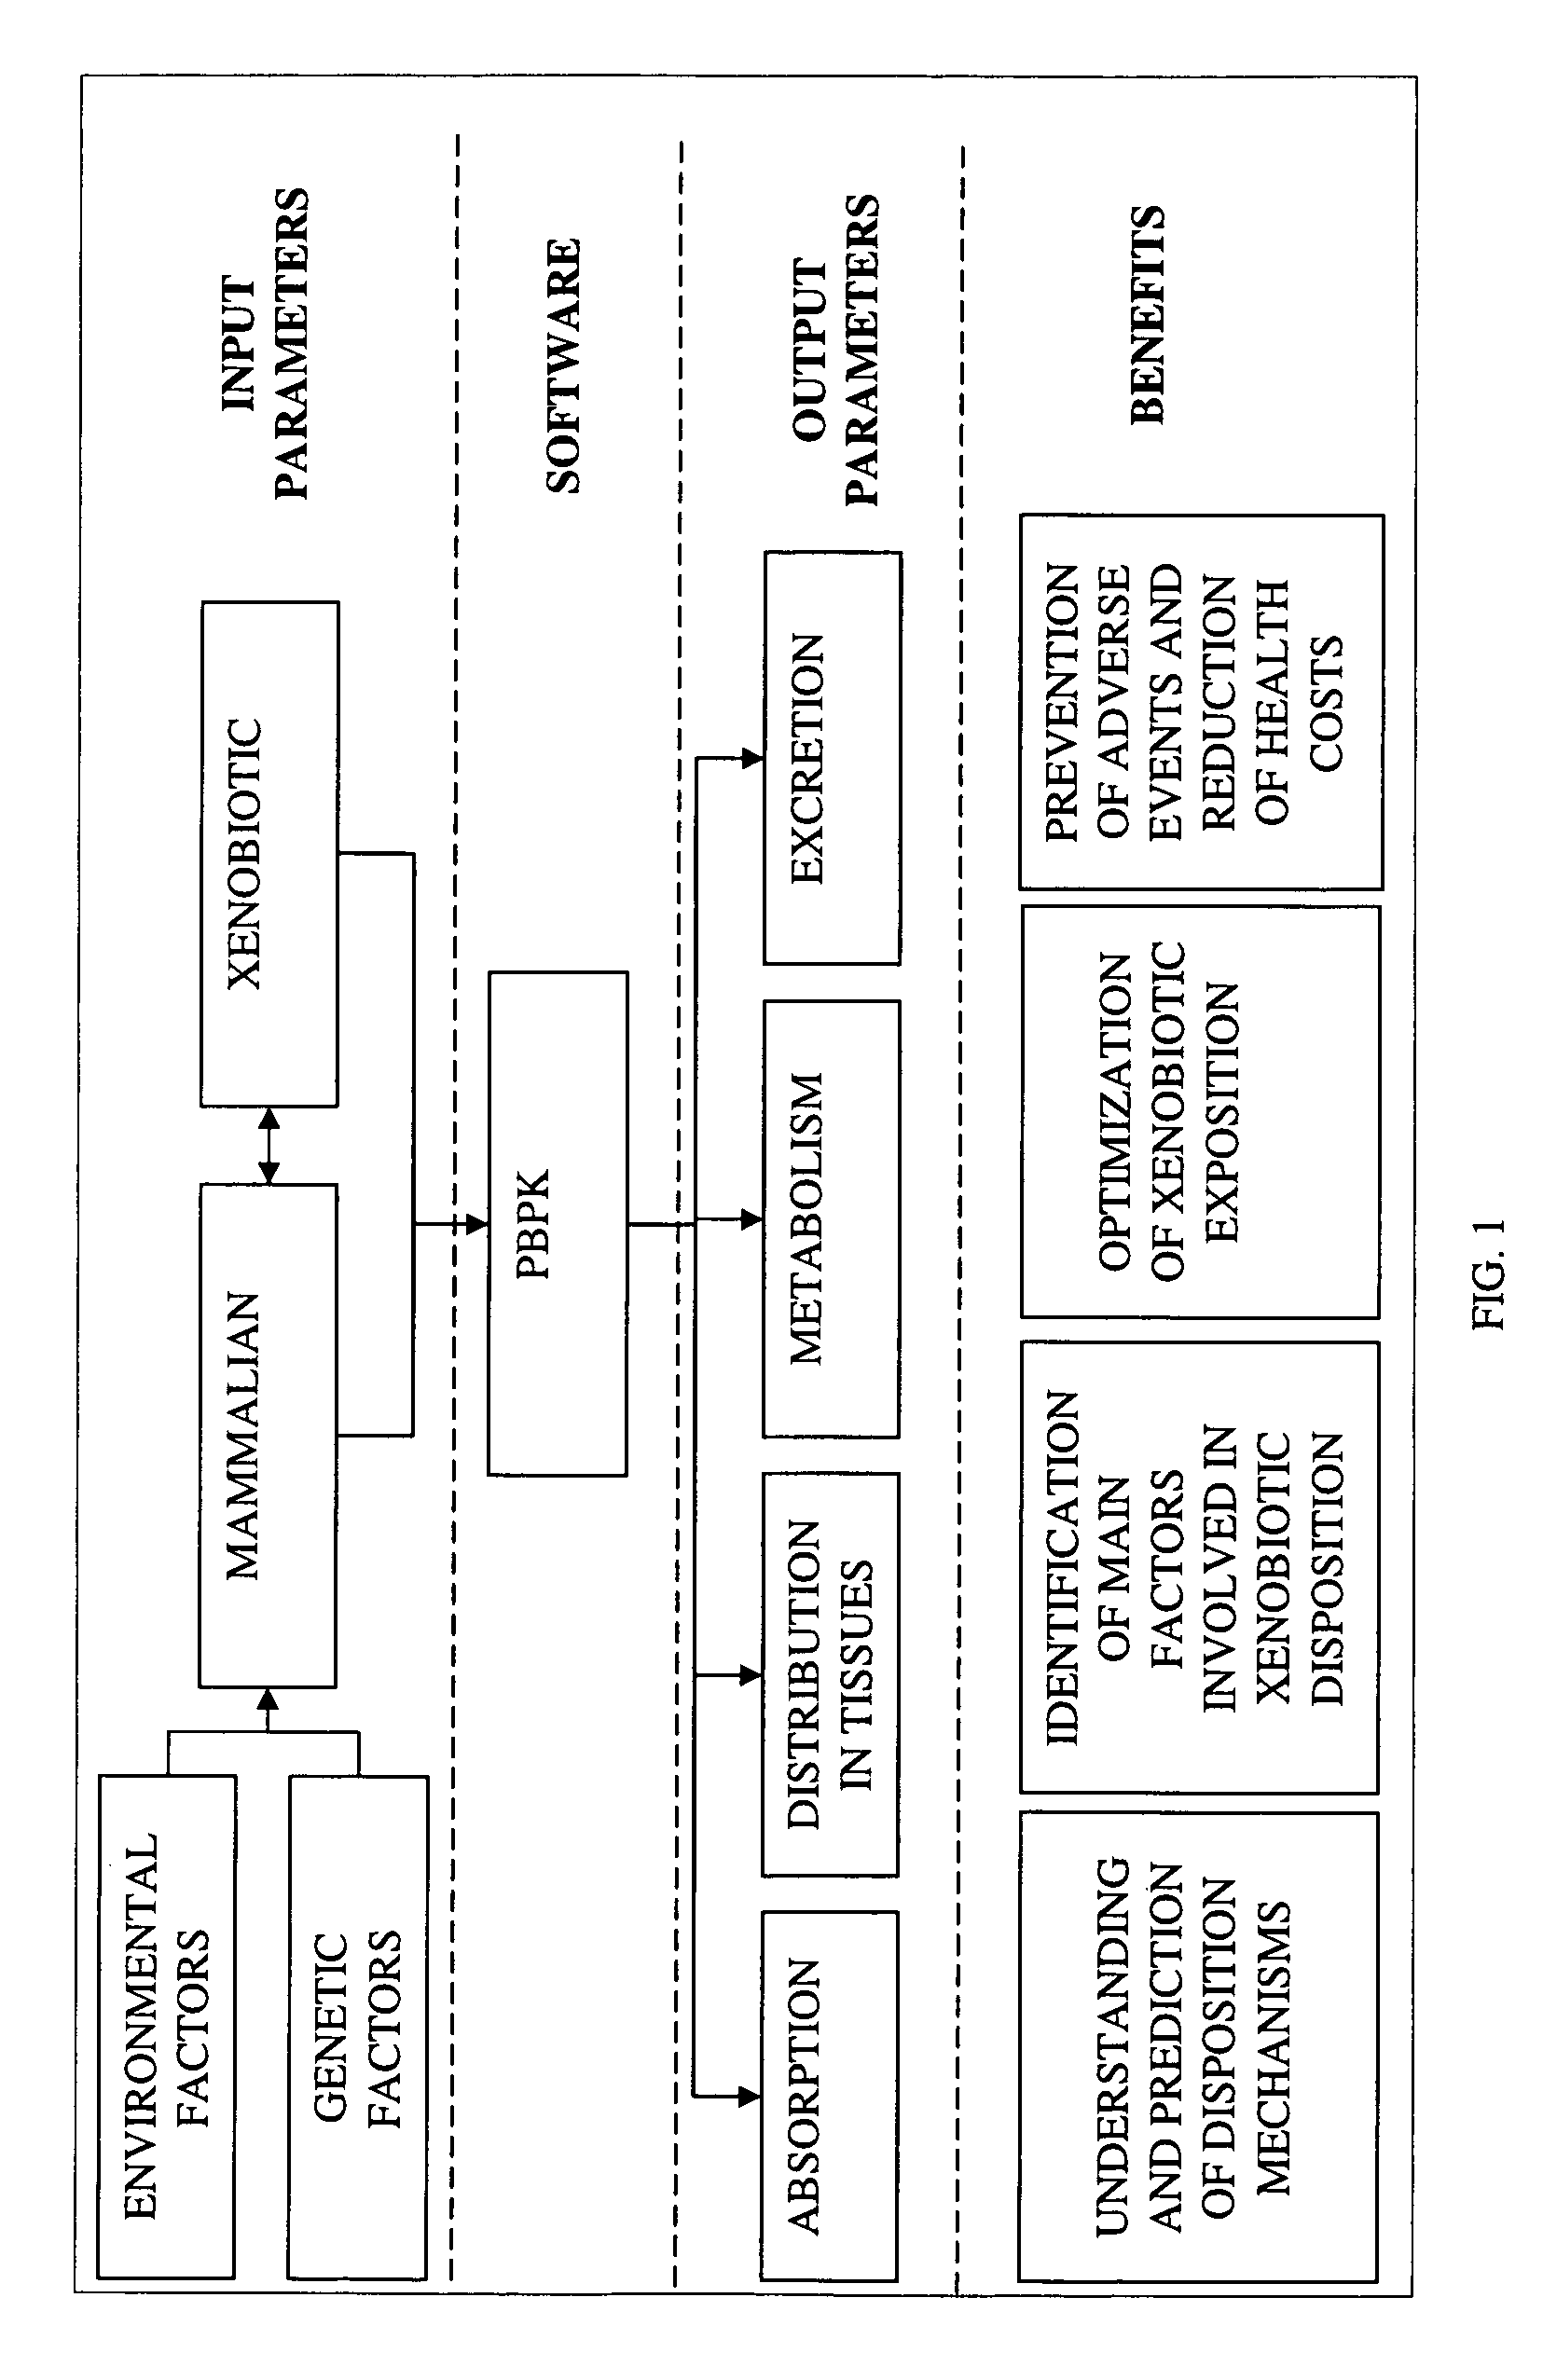 Method of developing a pharmacokinetic profile of a xenobiotic disposition in a mammalian tissue